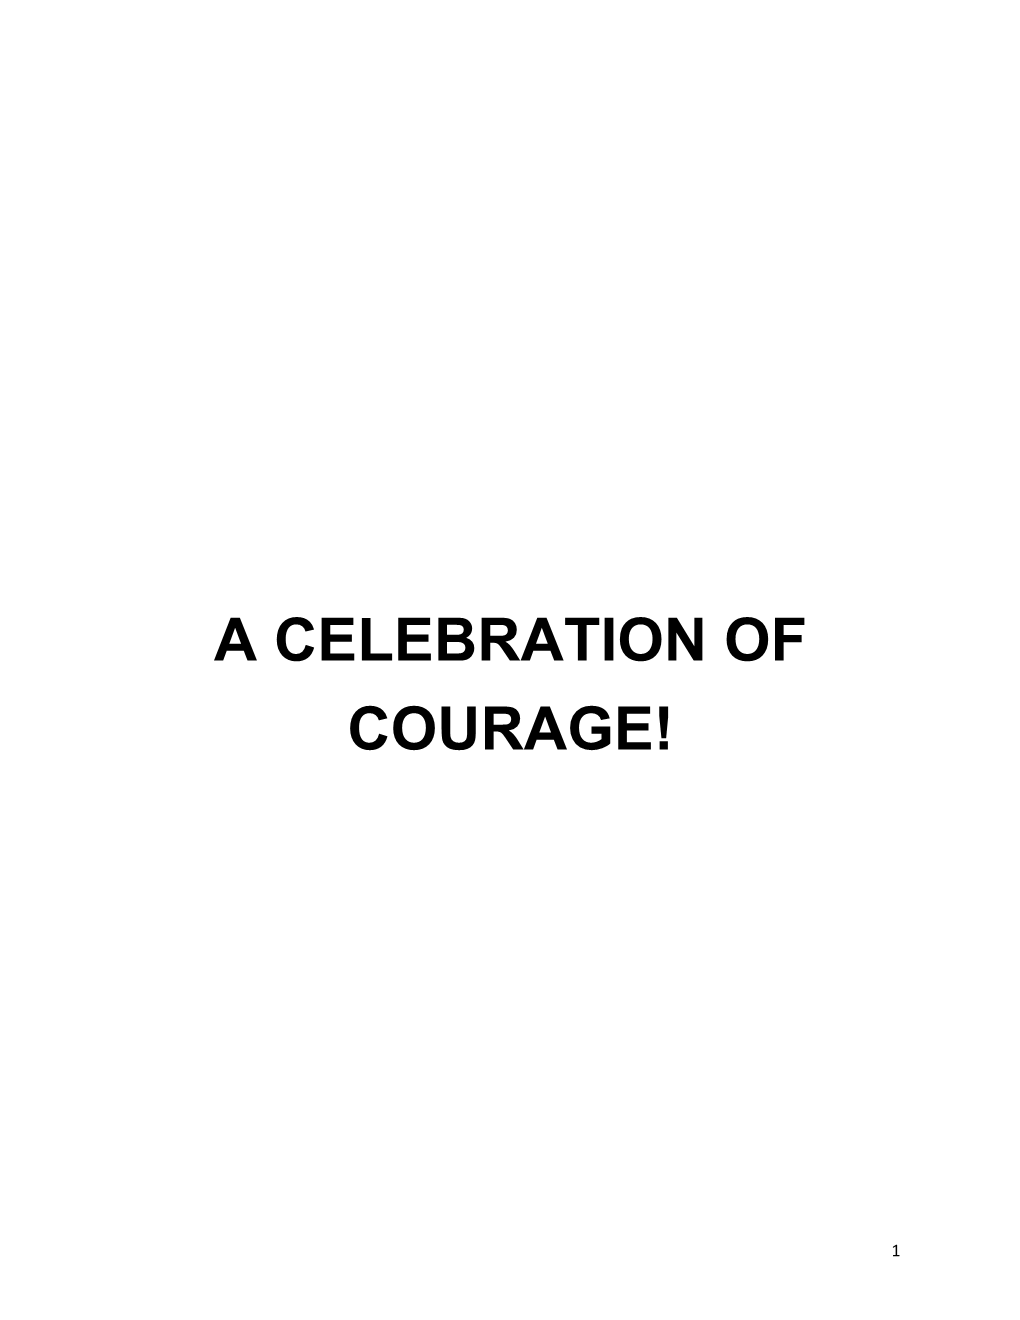 A Celebration of Courage!